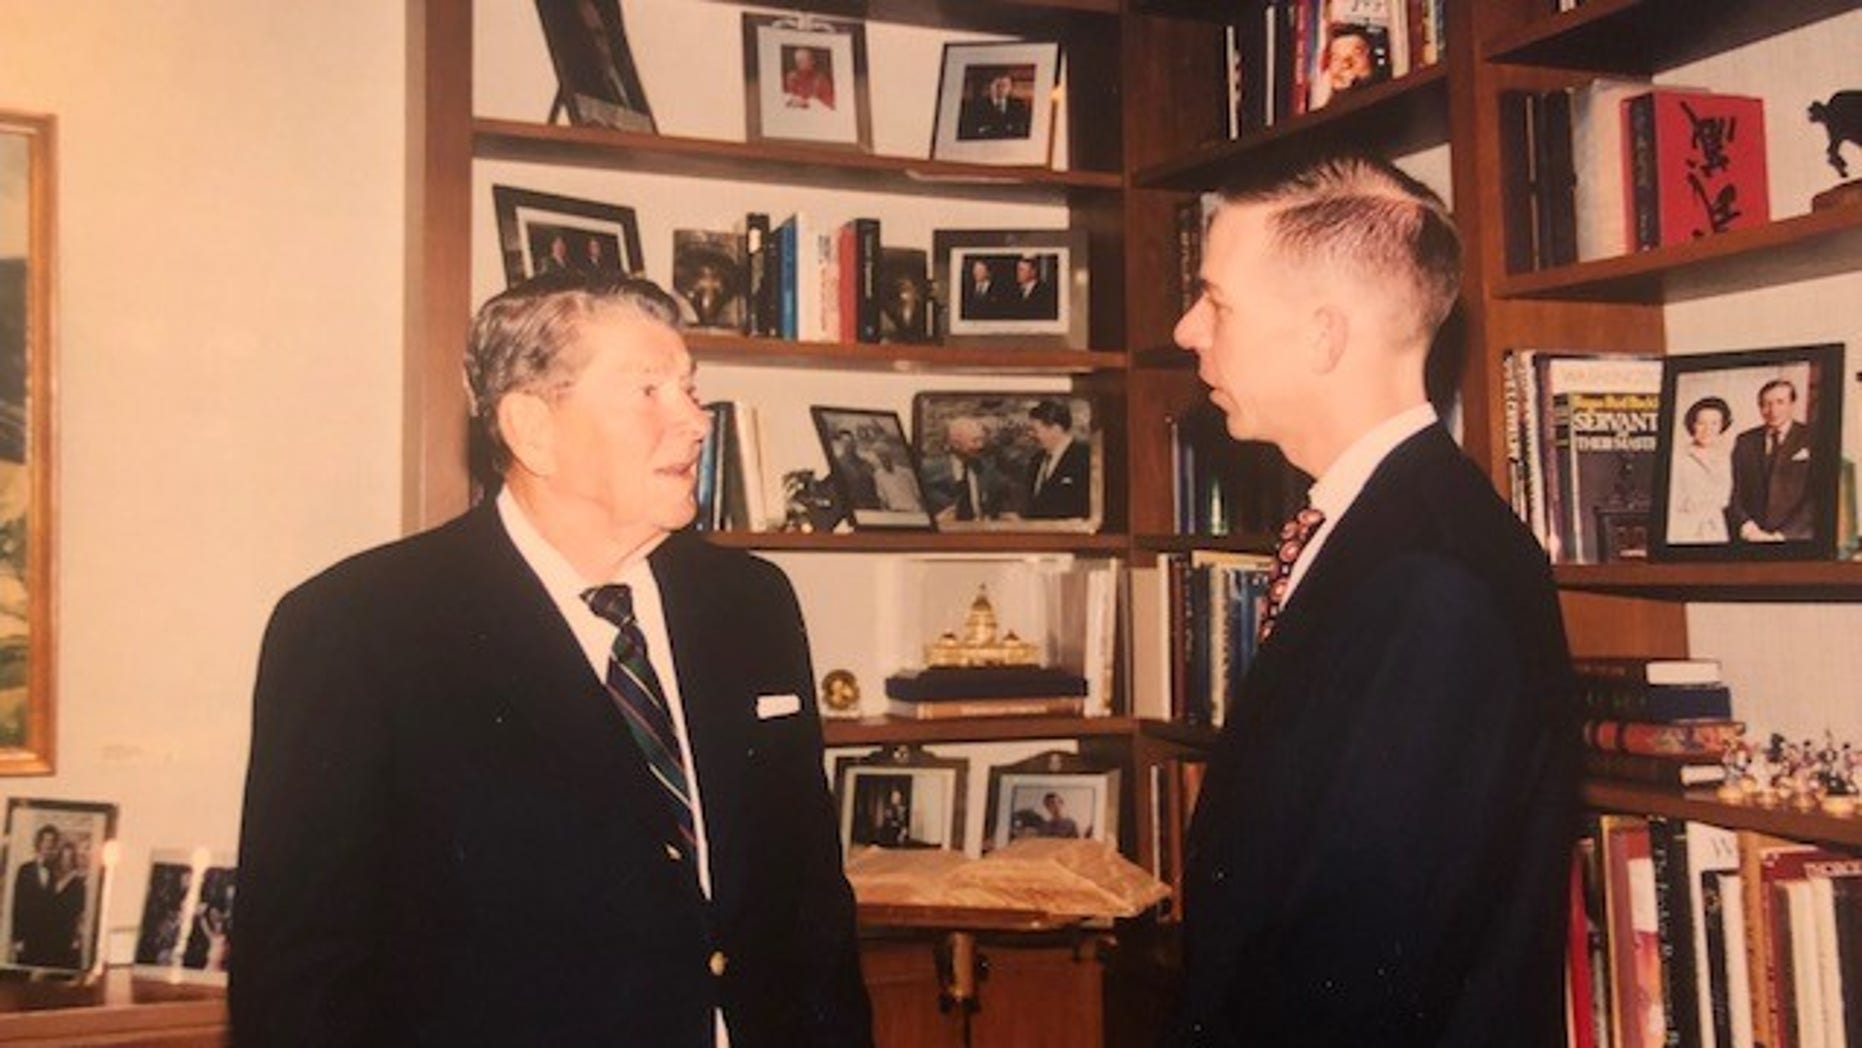 New year, new hopes -- what Ronald Reagan taught me about pursuing your dreams